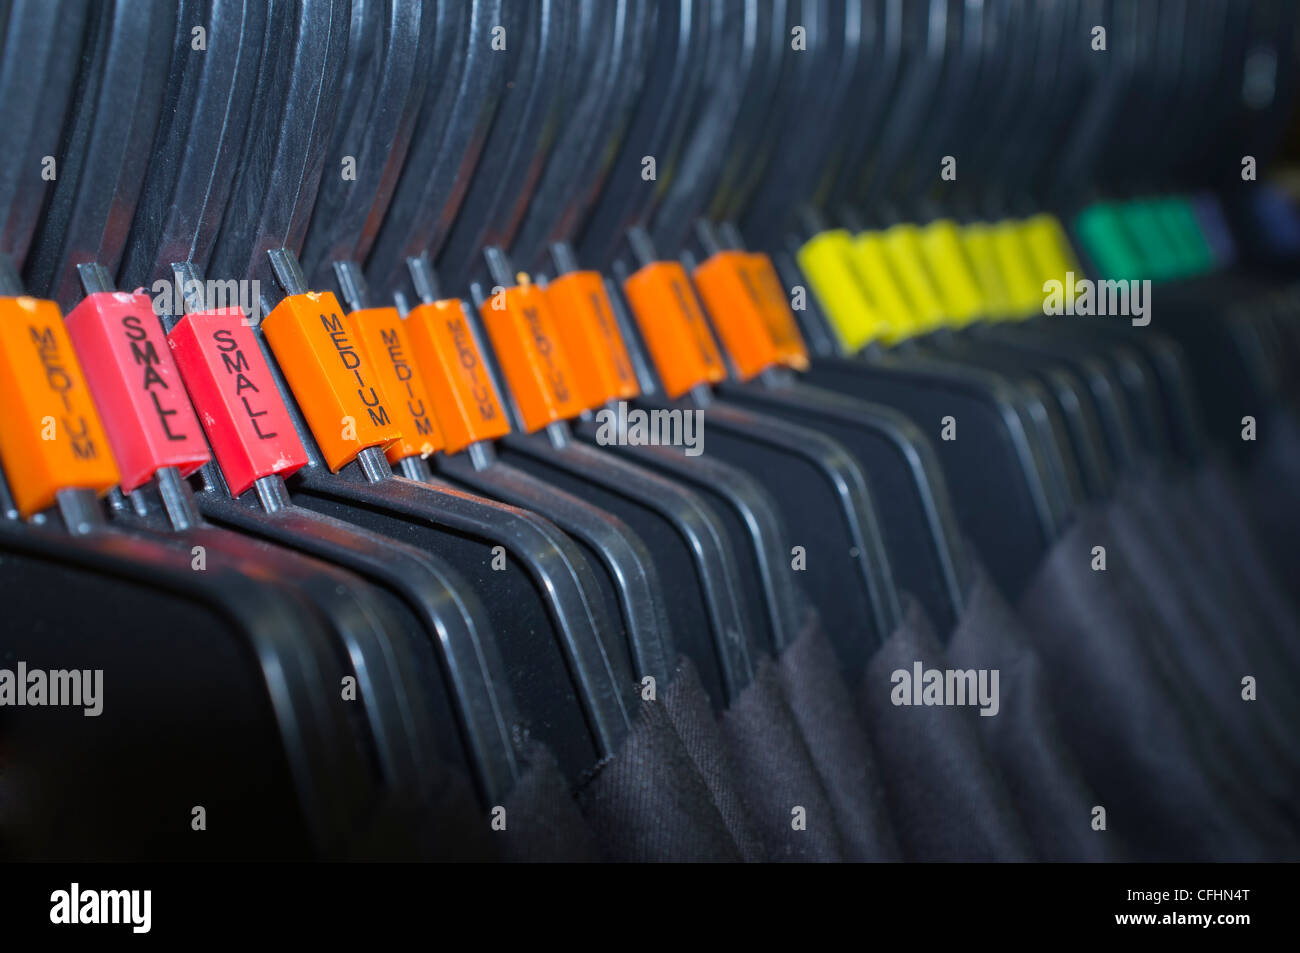 Hangers sorted by size in a clothing shopping center Stock Photo